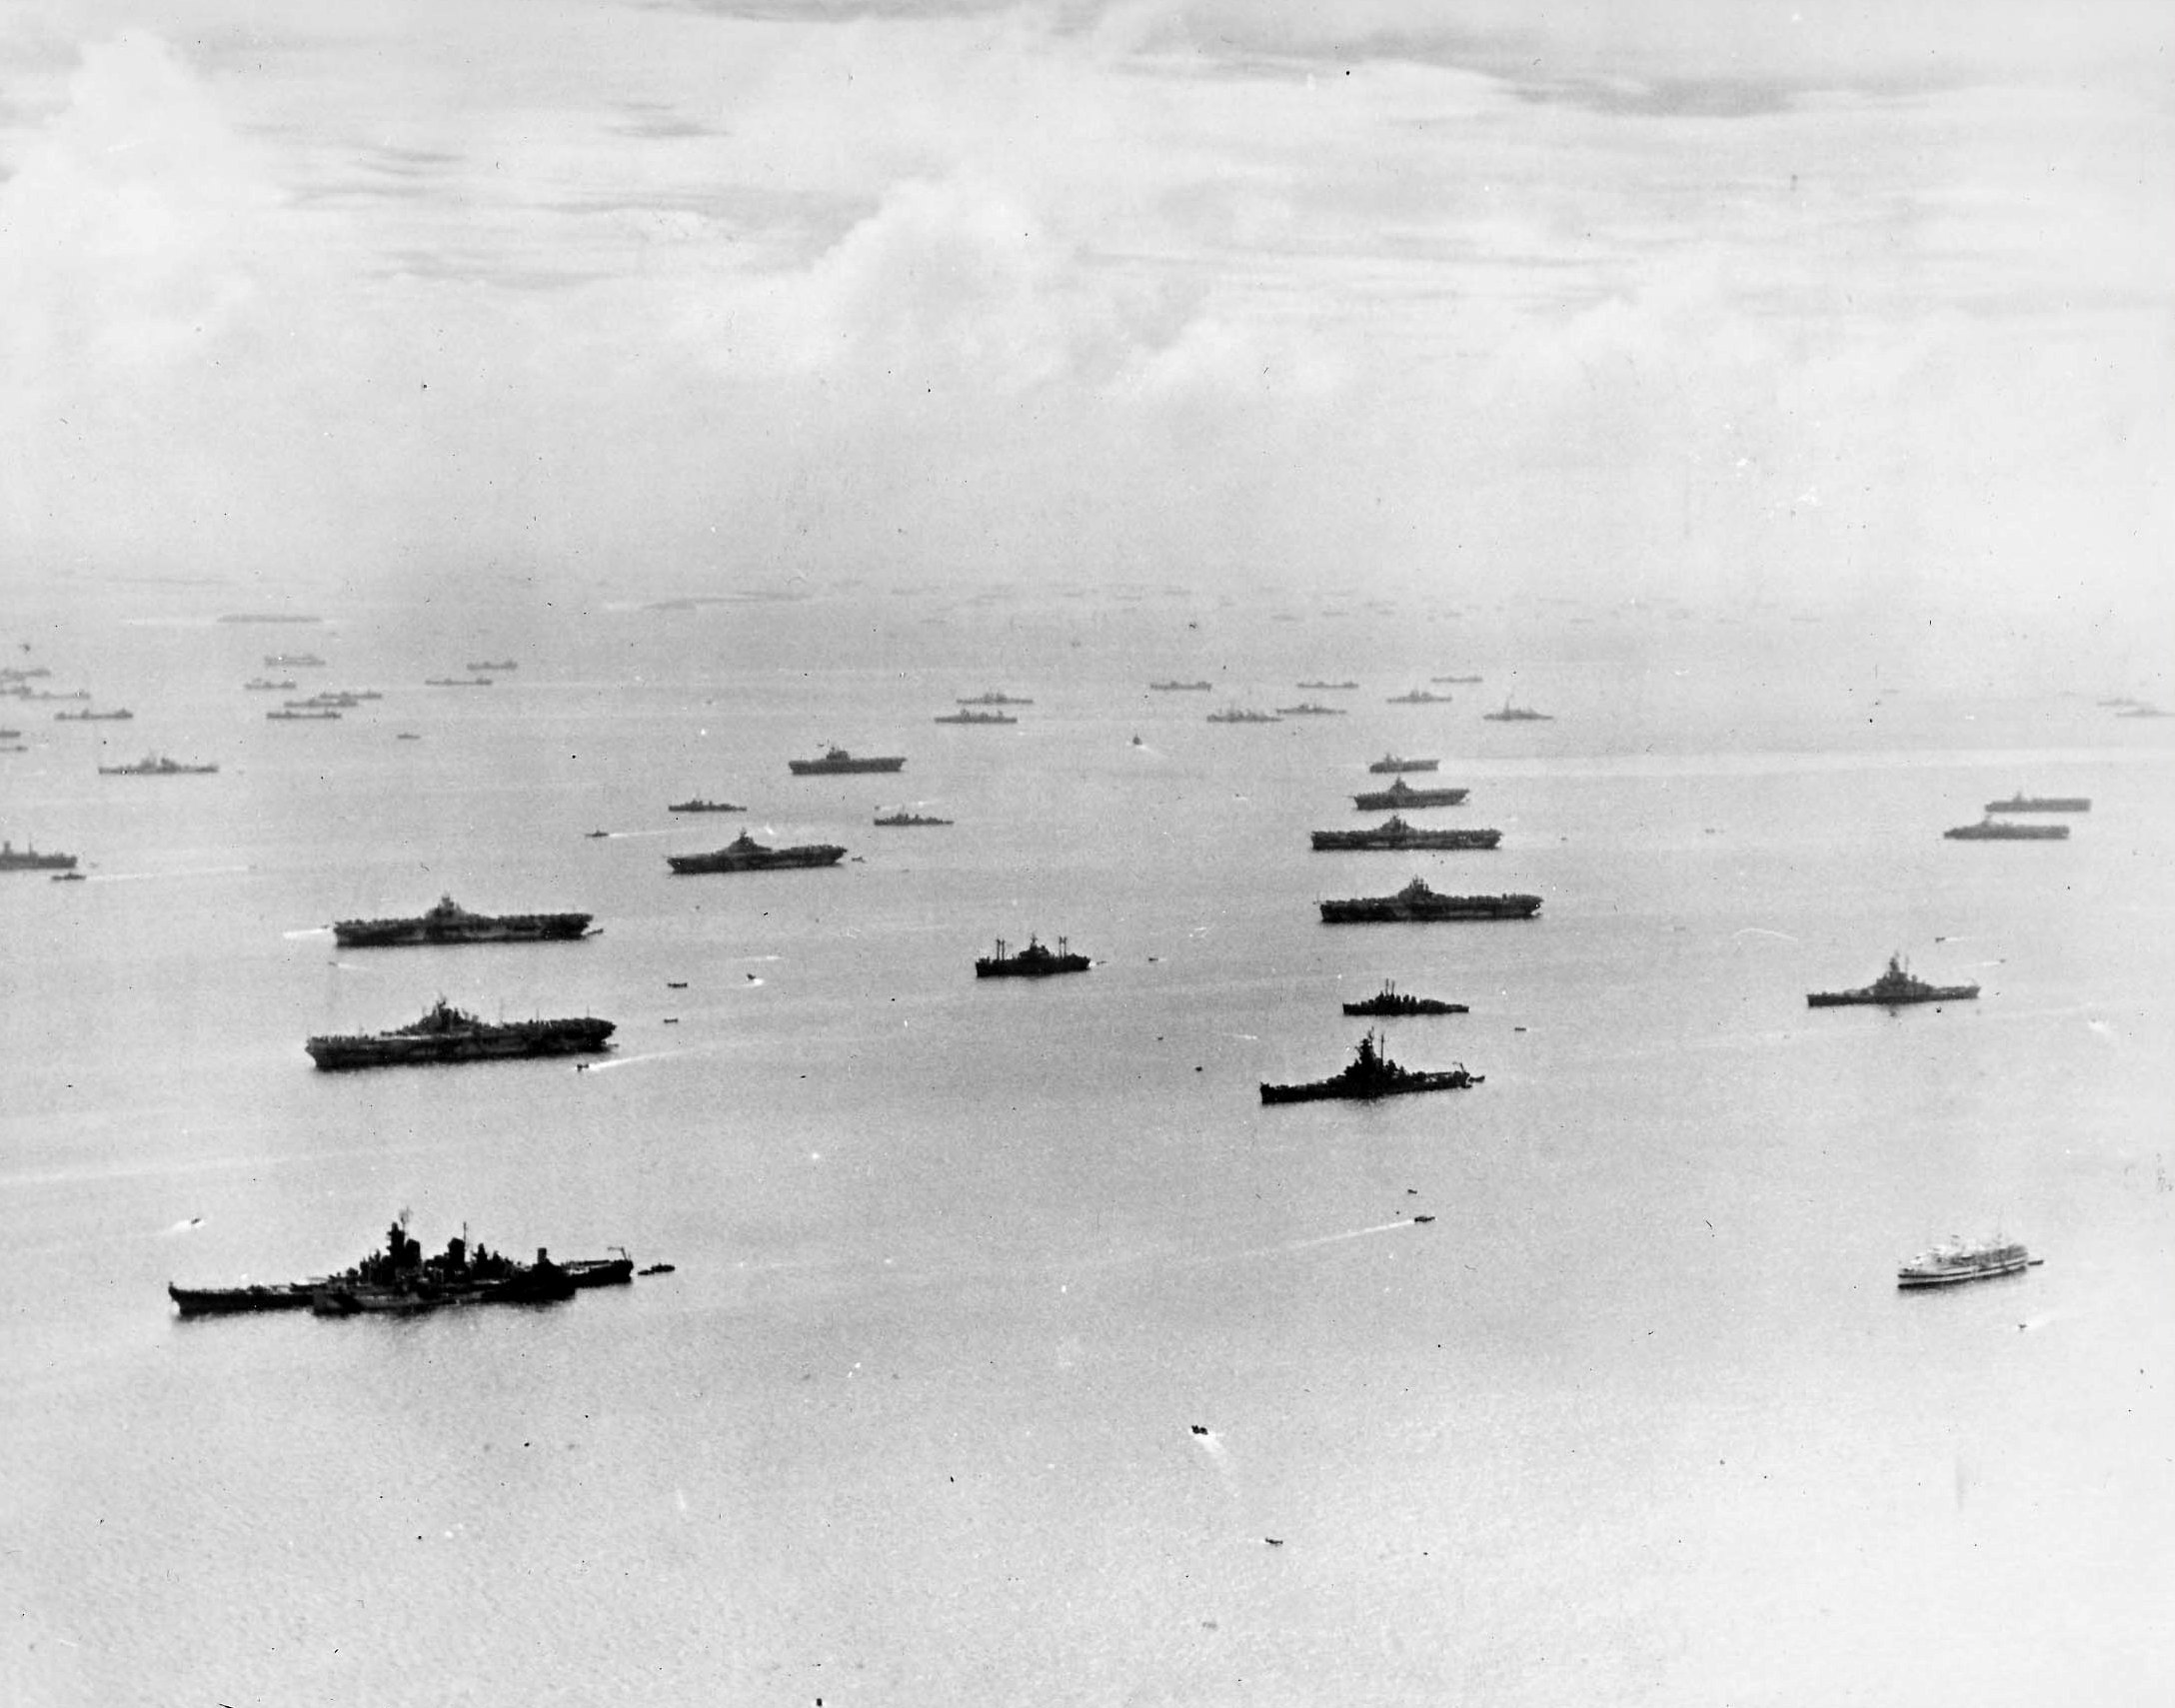 Ships of the US fleet at Ulithi Atoll, Caroline Islands, 8 Feb 1945. Visible are 7 large carriers, 3 light carriers, 3 battleships, and numerous cruisers, destroyers, and support vessels including 1 hospital ship.